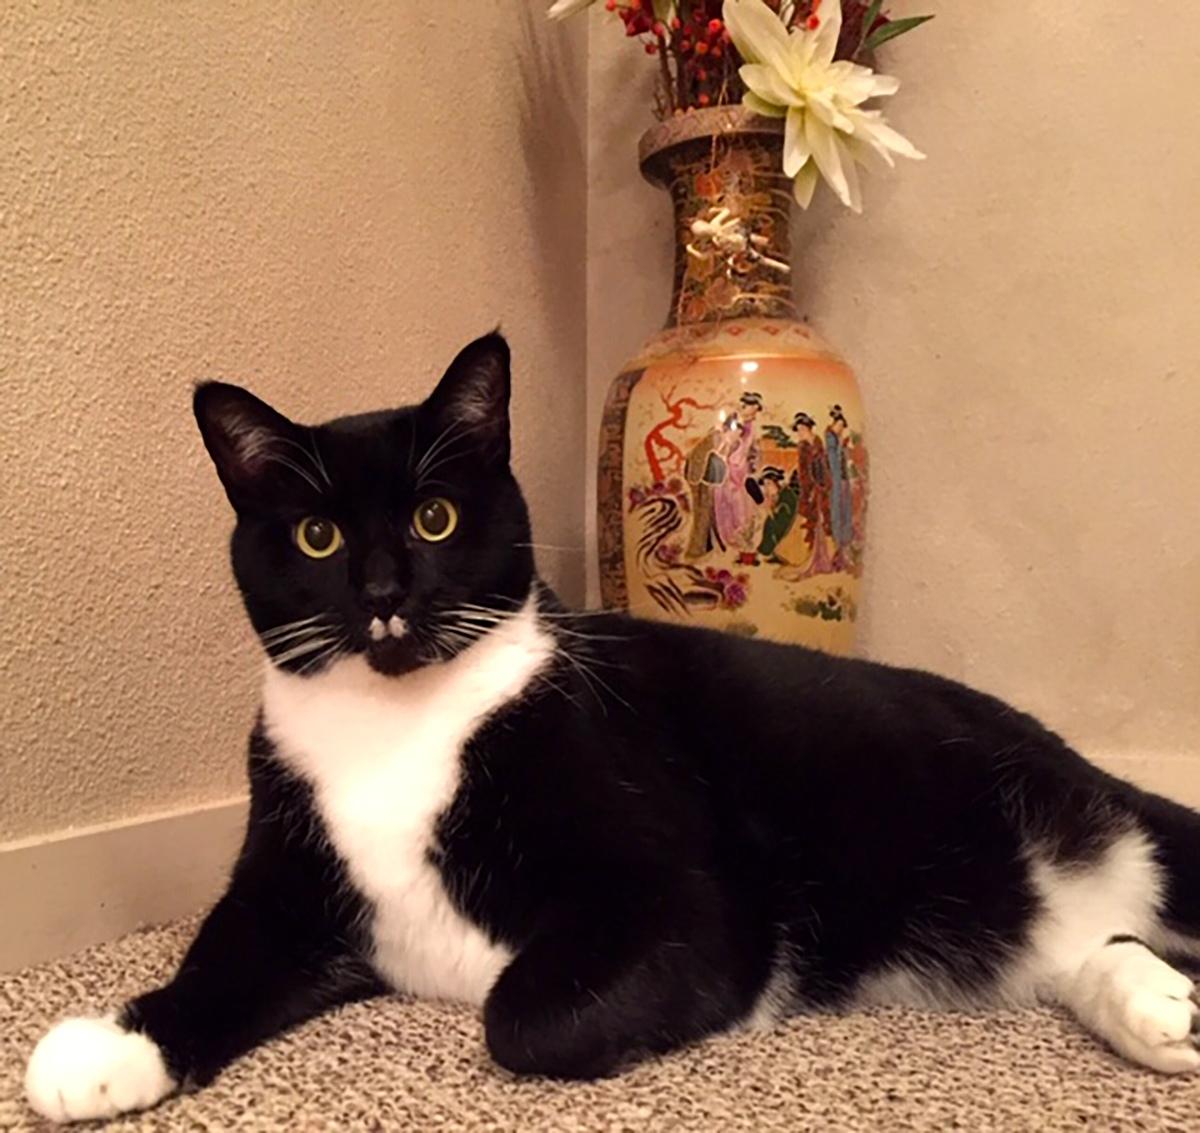 Tantalizing tuxedo cat seen relaxing in his amazing coolness